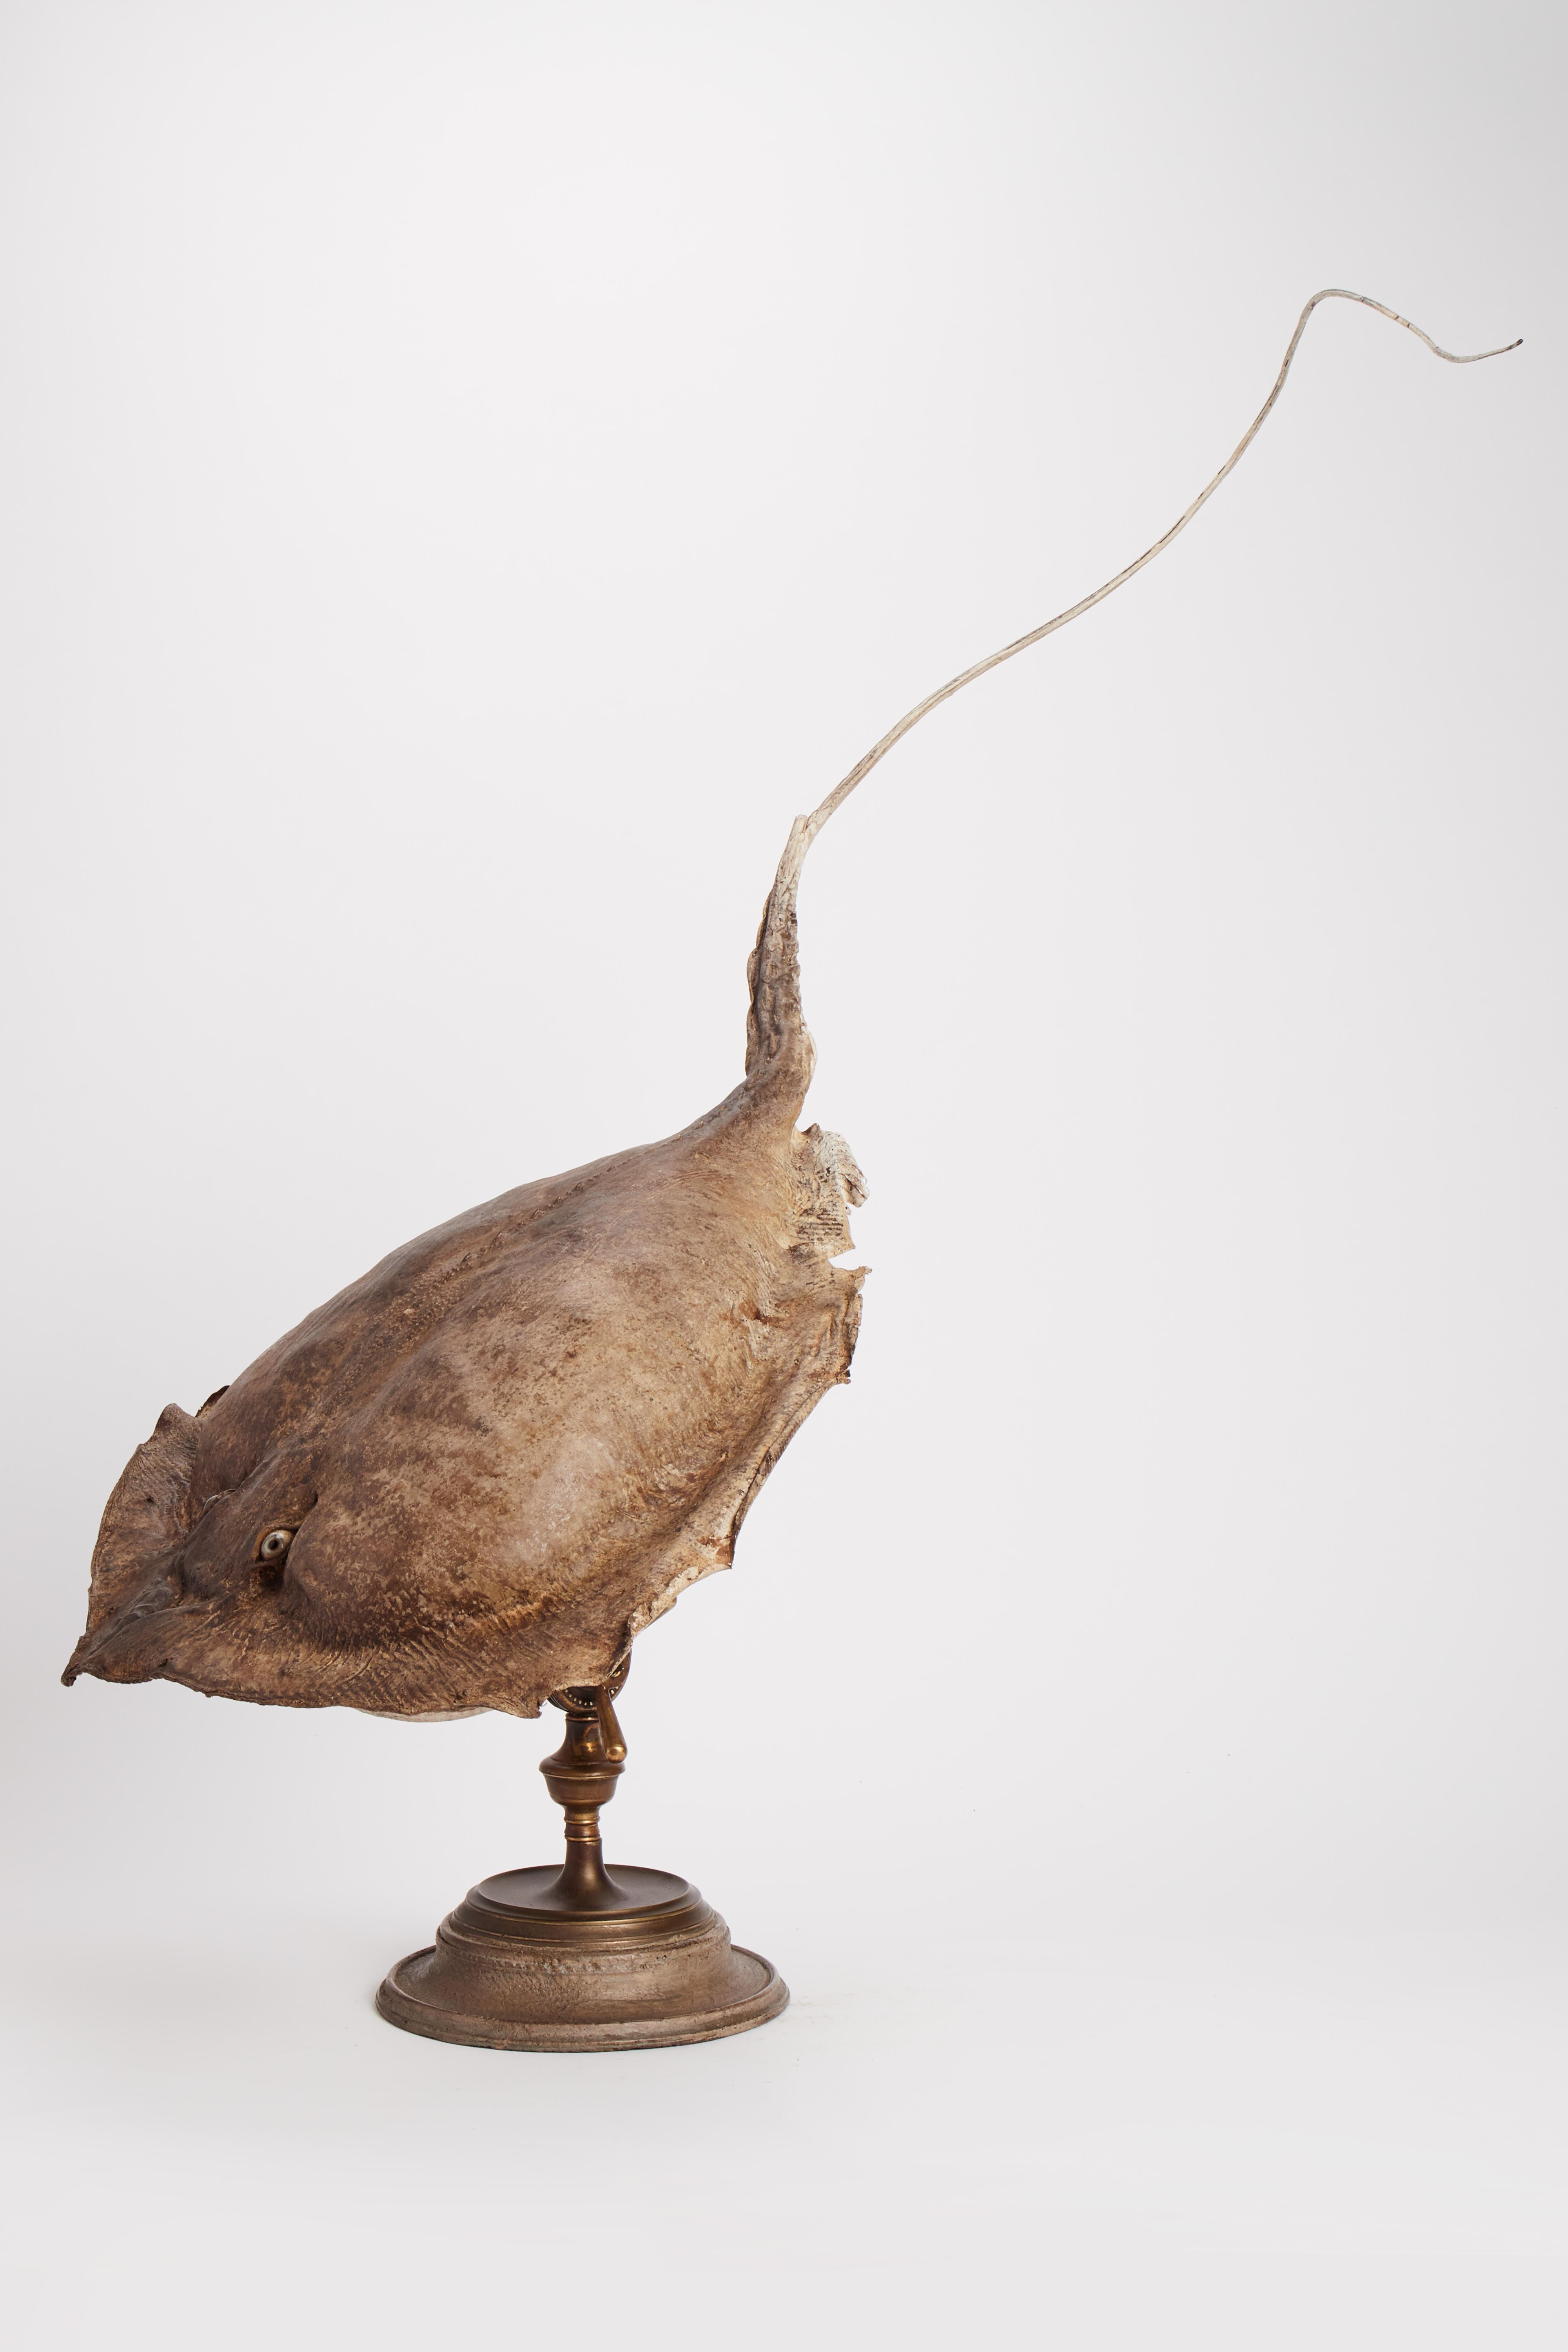 A 19th century Wunderkammer rare marine natural taxidermy specimen of a stingray (Raja Clavata). The specimen is stuffed, with glass eyes and mounted over brass and painted wooden base.